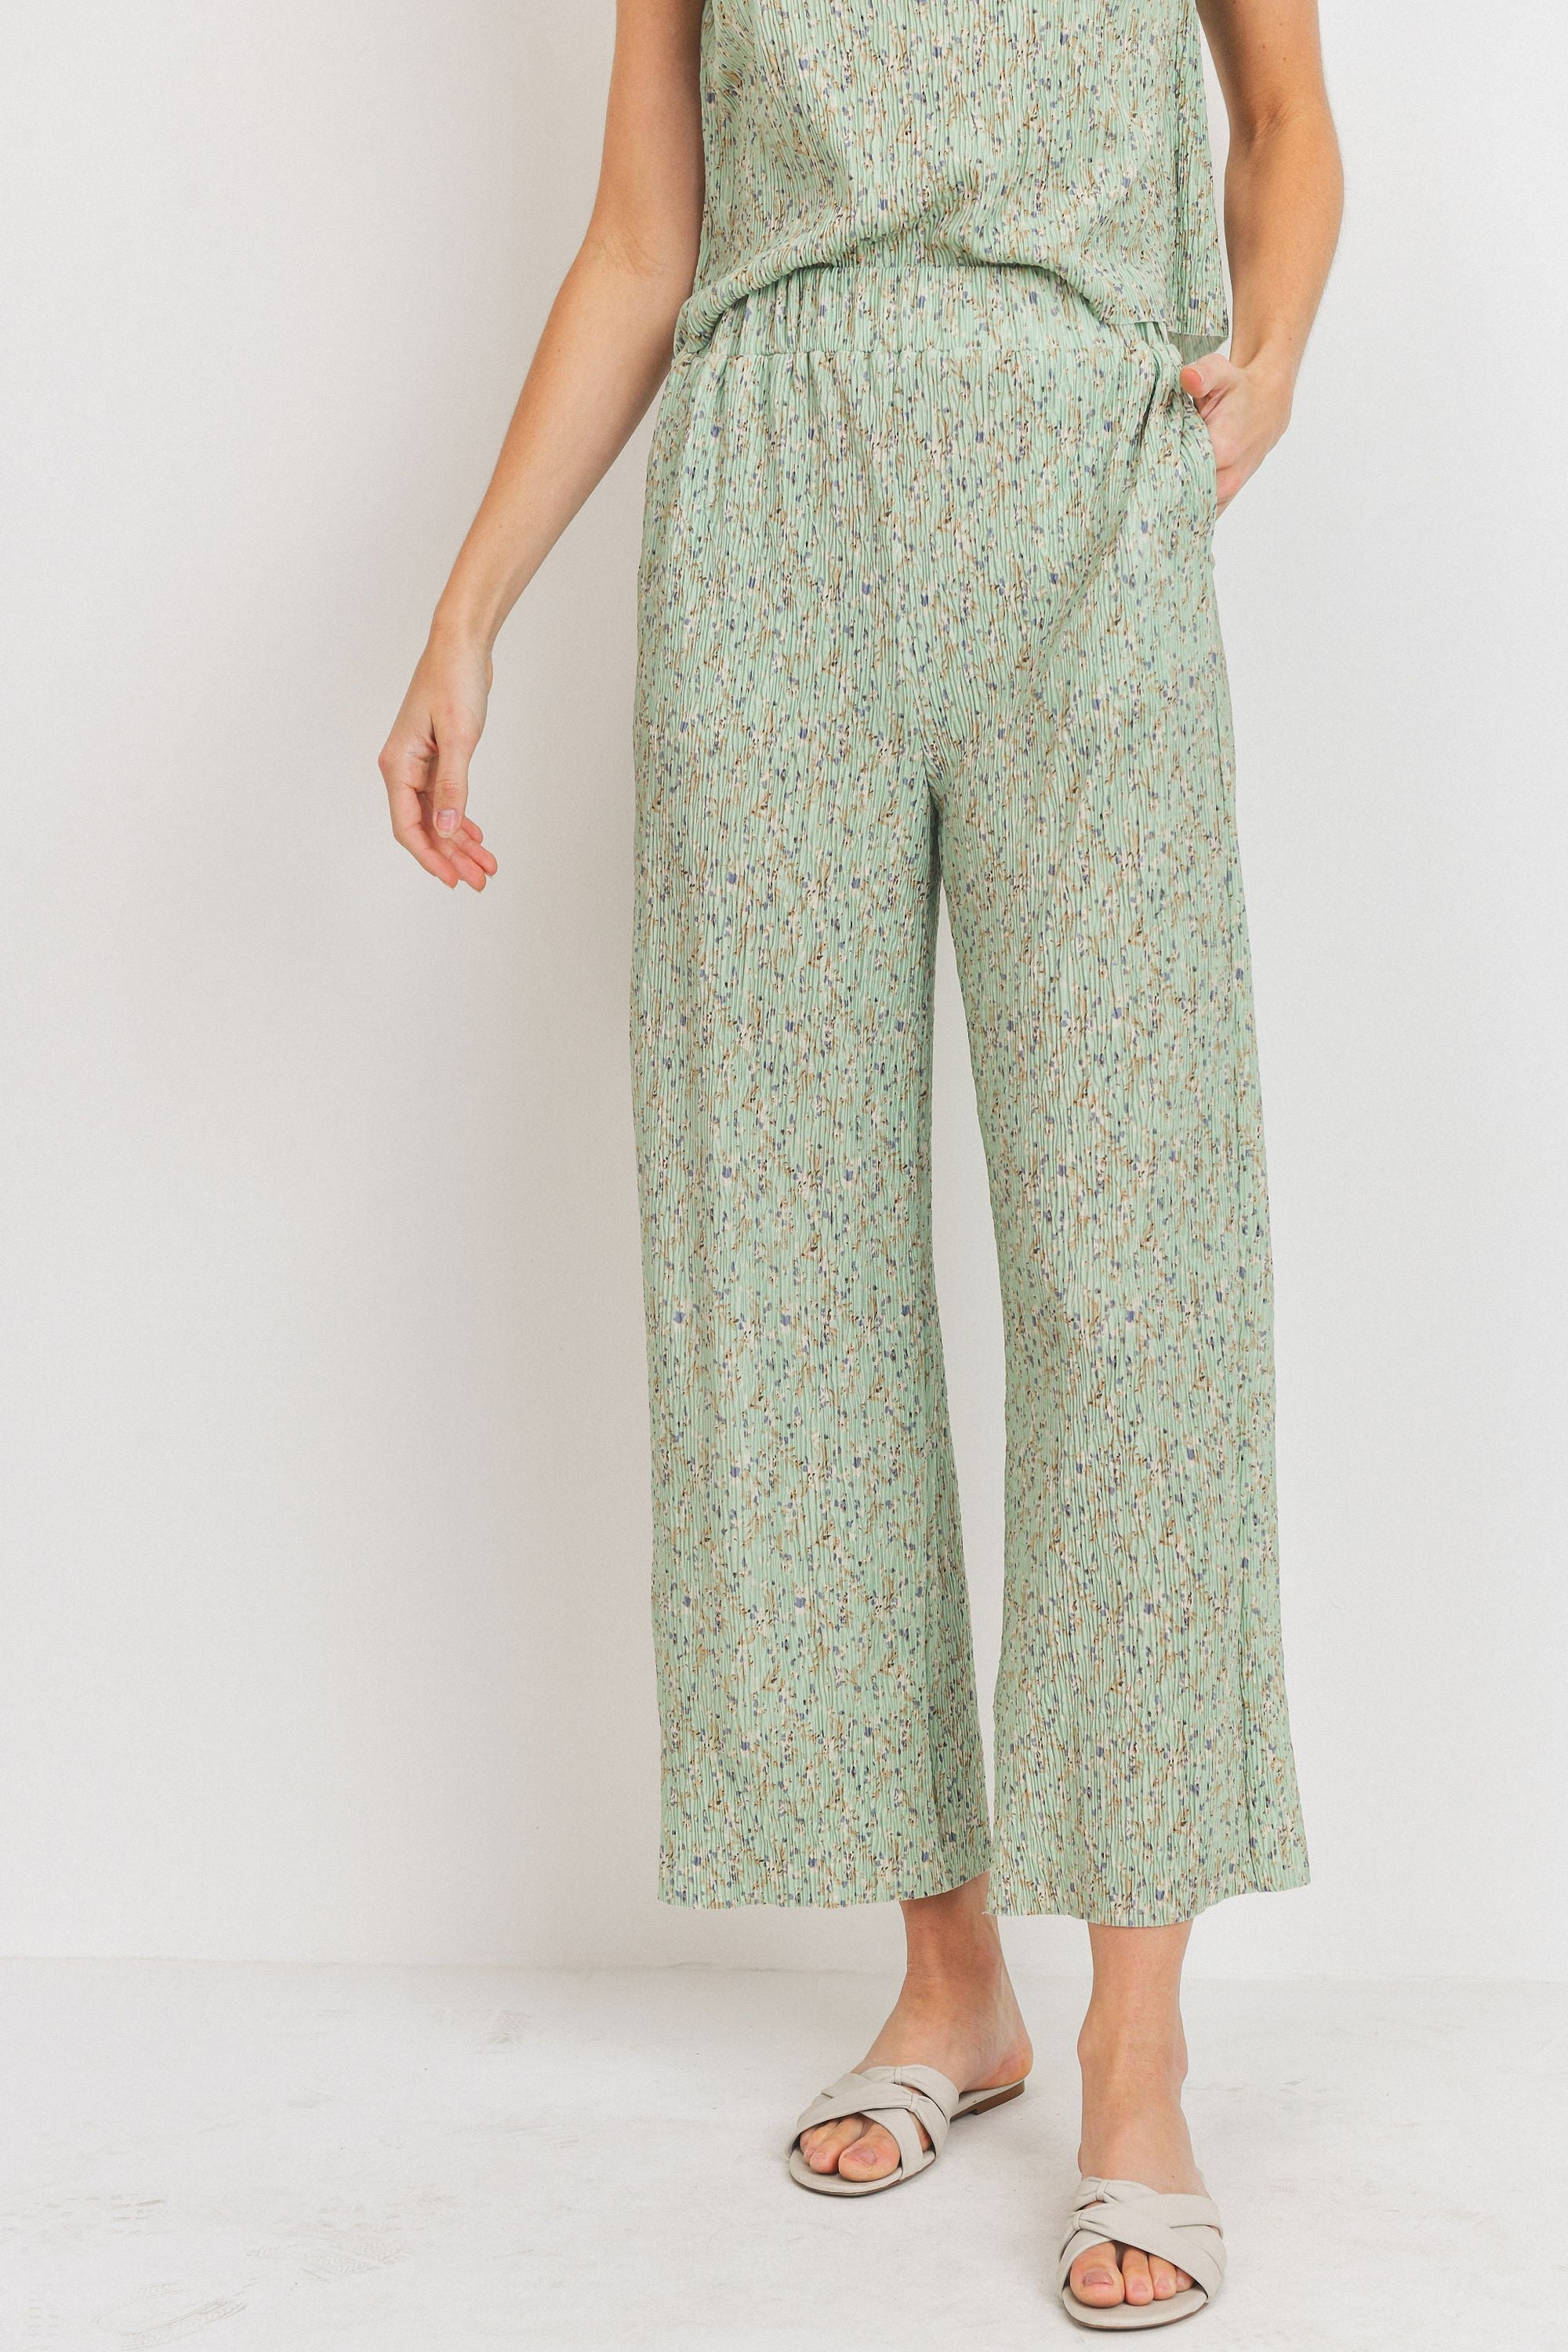 Hydii Two Sided Pocket Ditsy Floral Pants